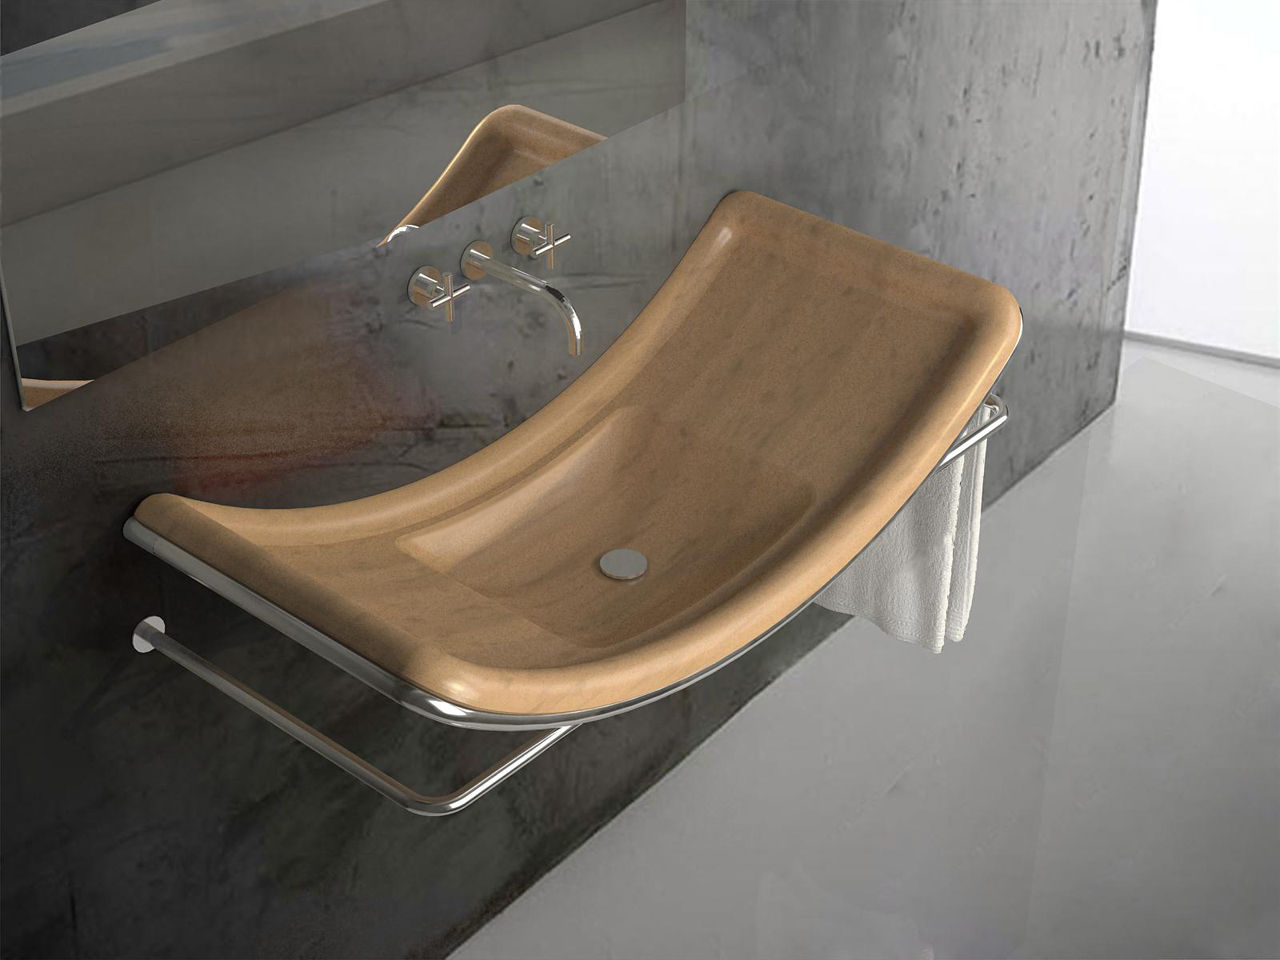 Lavabo S, DiciannoveDieciDesign DiciannoveDieciDesign Modern bathroom Wood Wood effect Sinks